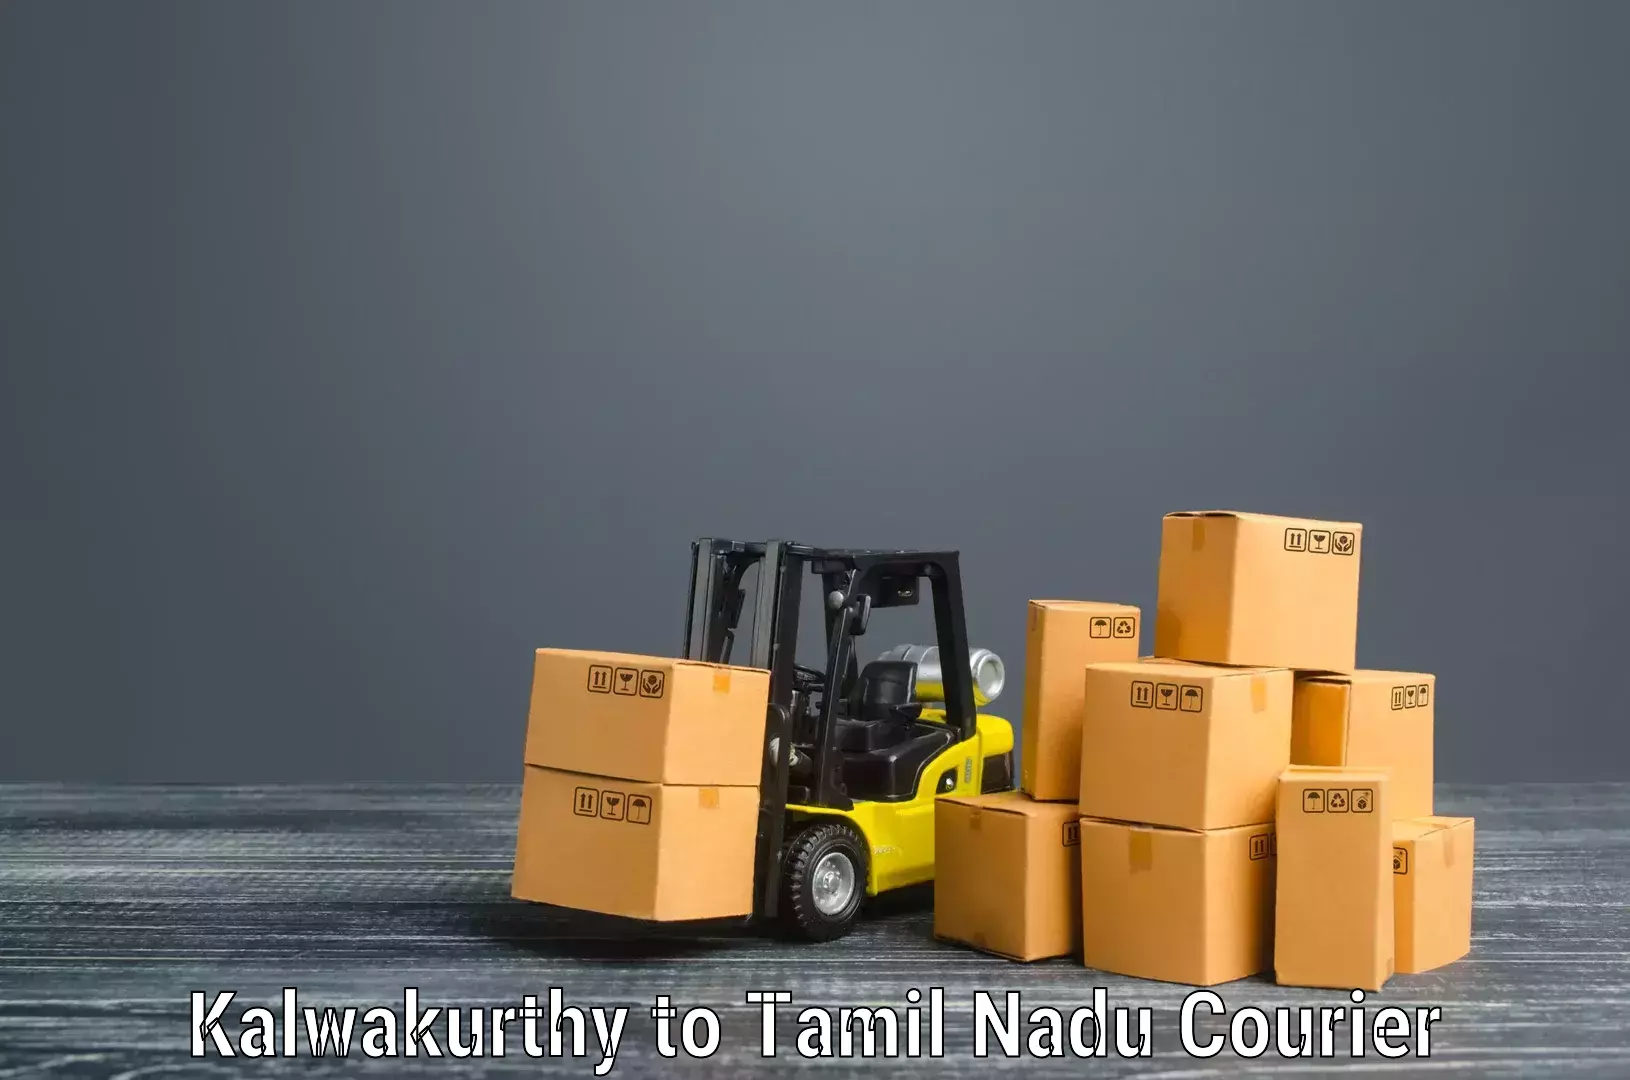 Trusted moving company Kalwakurthy to Ennore Port Chennai